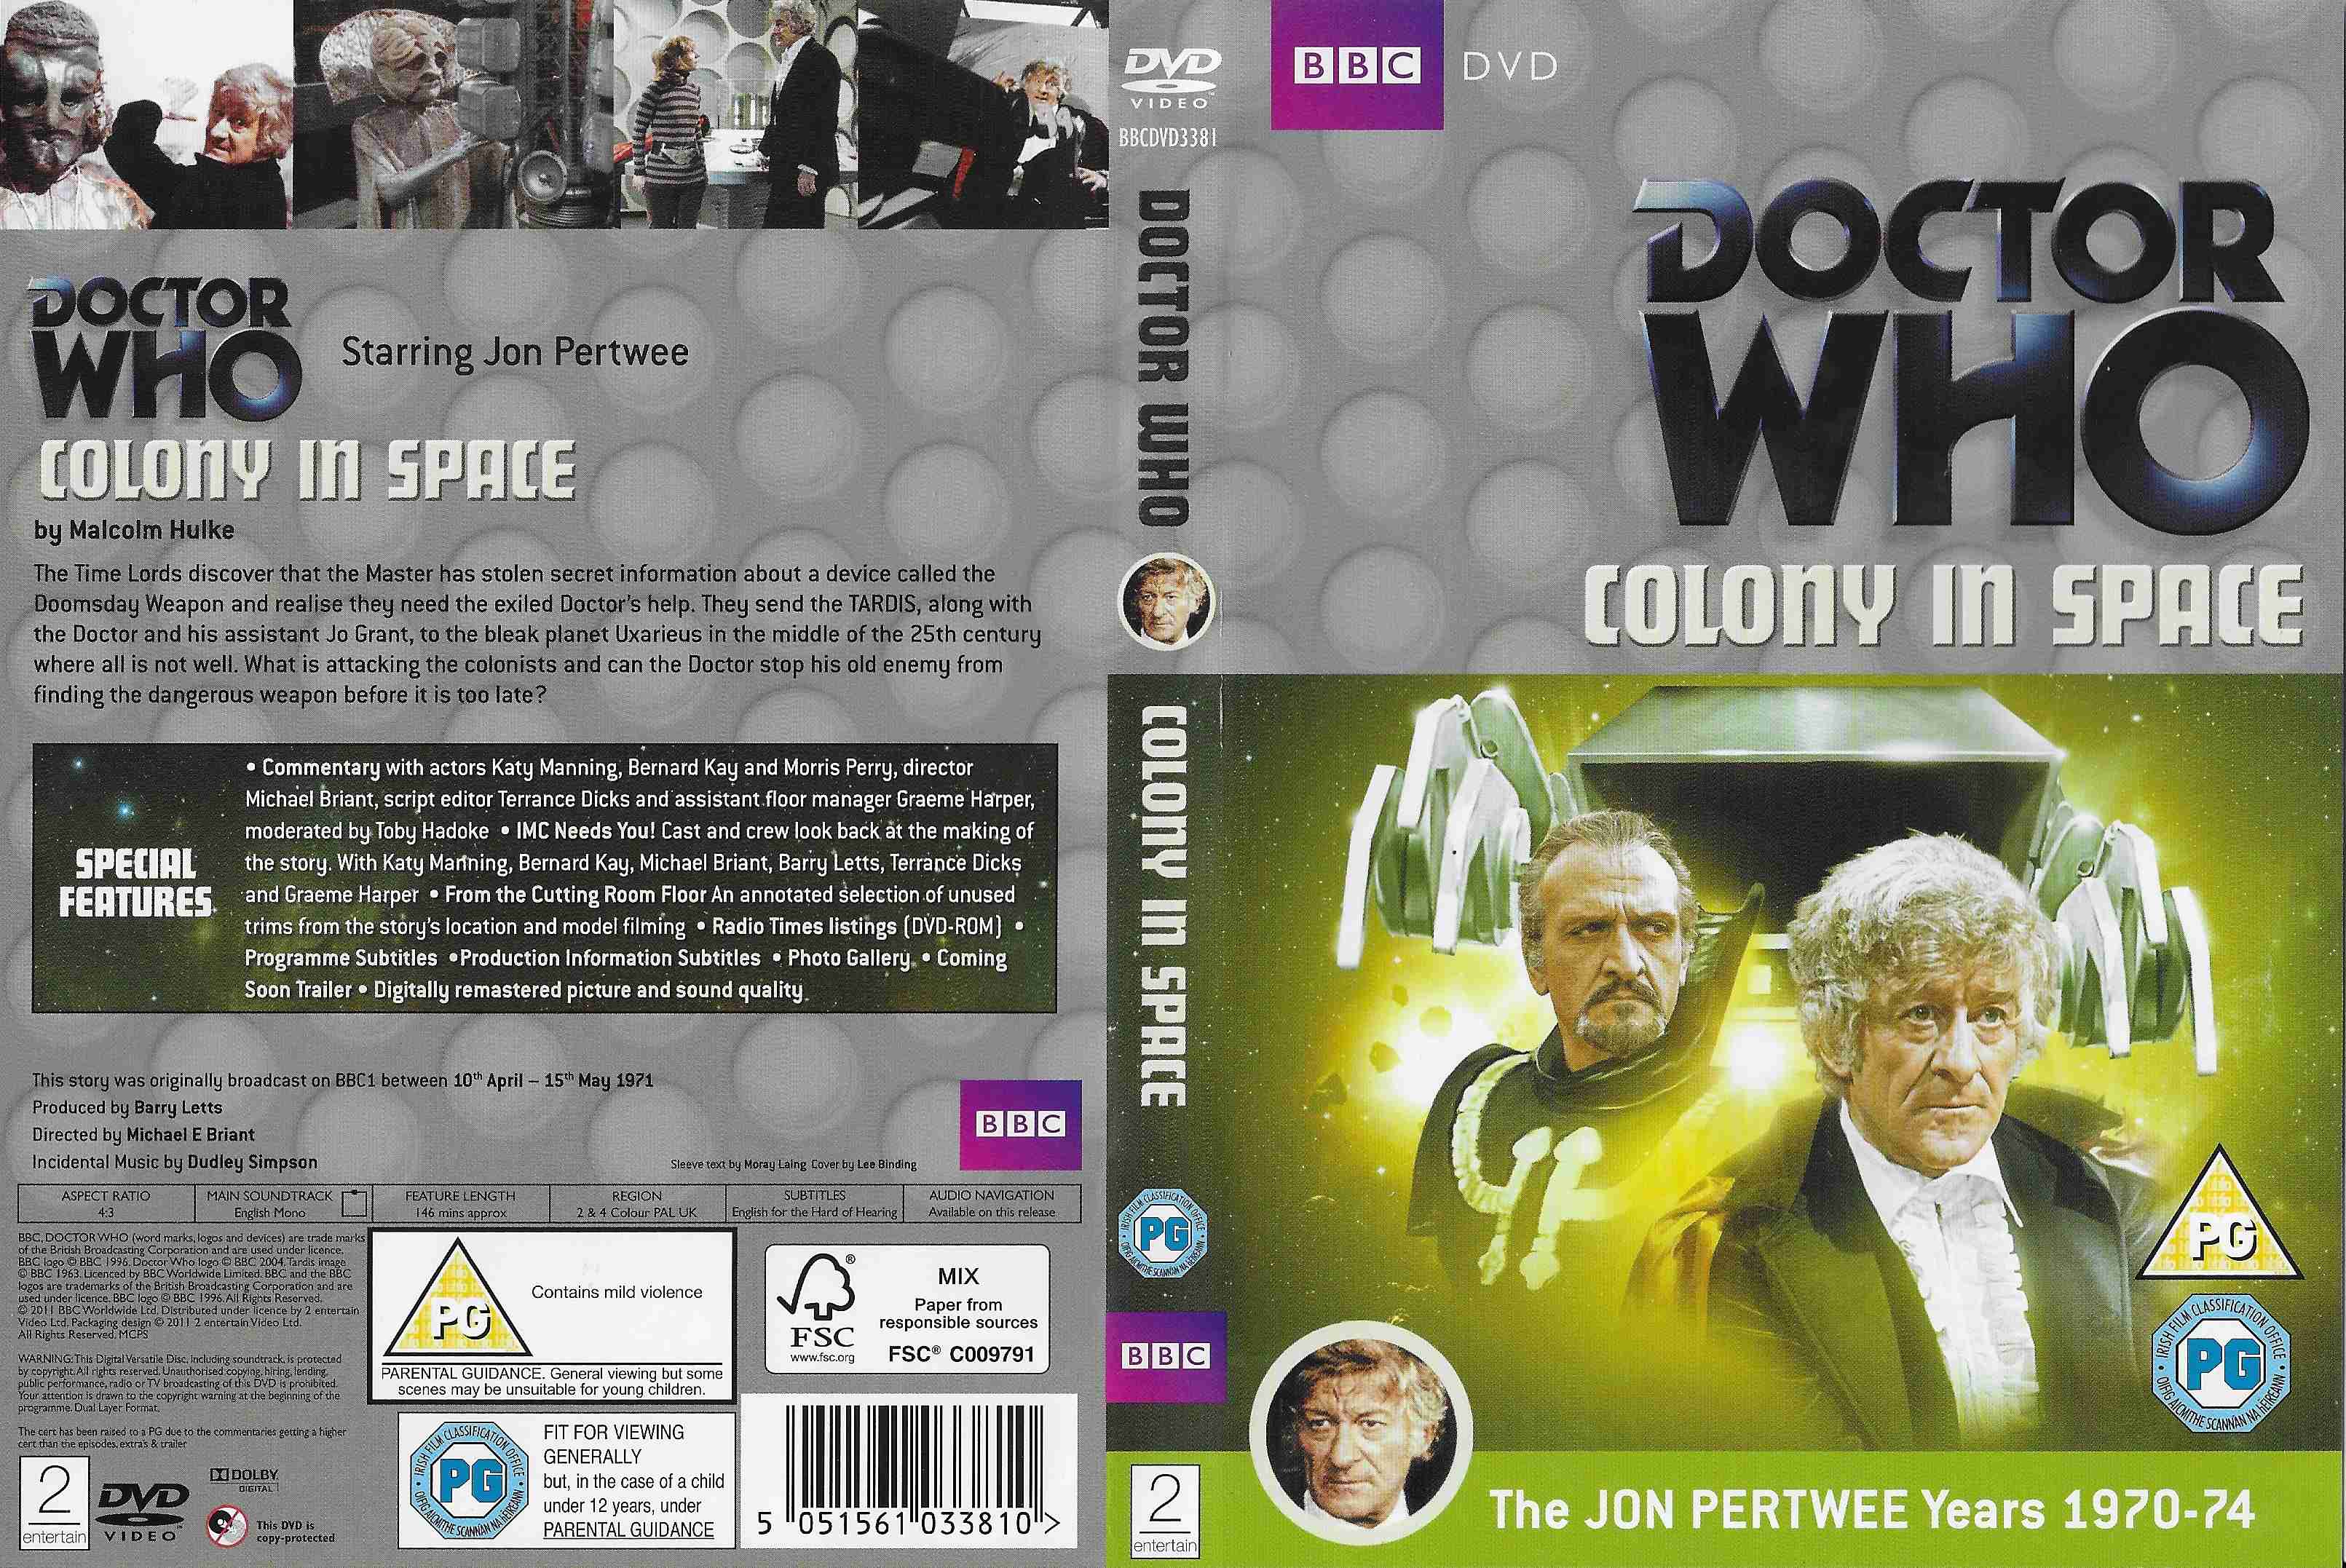 Picture of BBCDVD 3381 Doctor Who - Colony in space by artist Malcolm Hulke from the BBC records and Tapes library